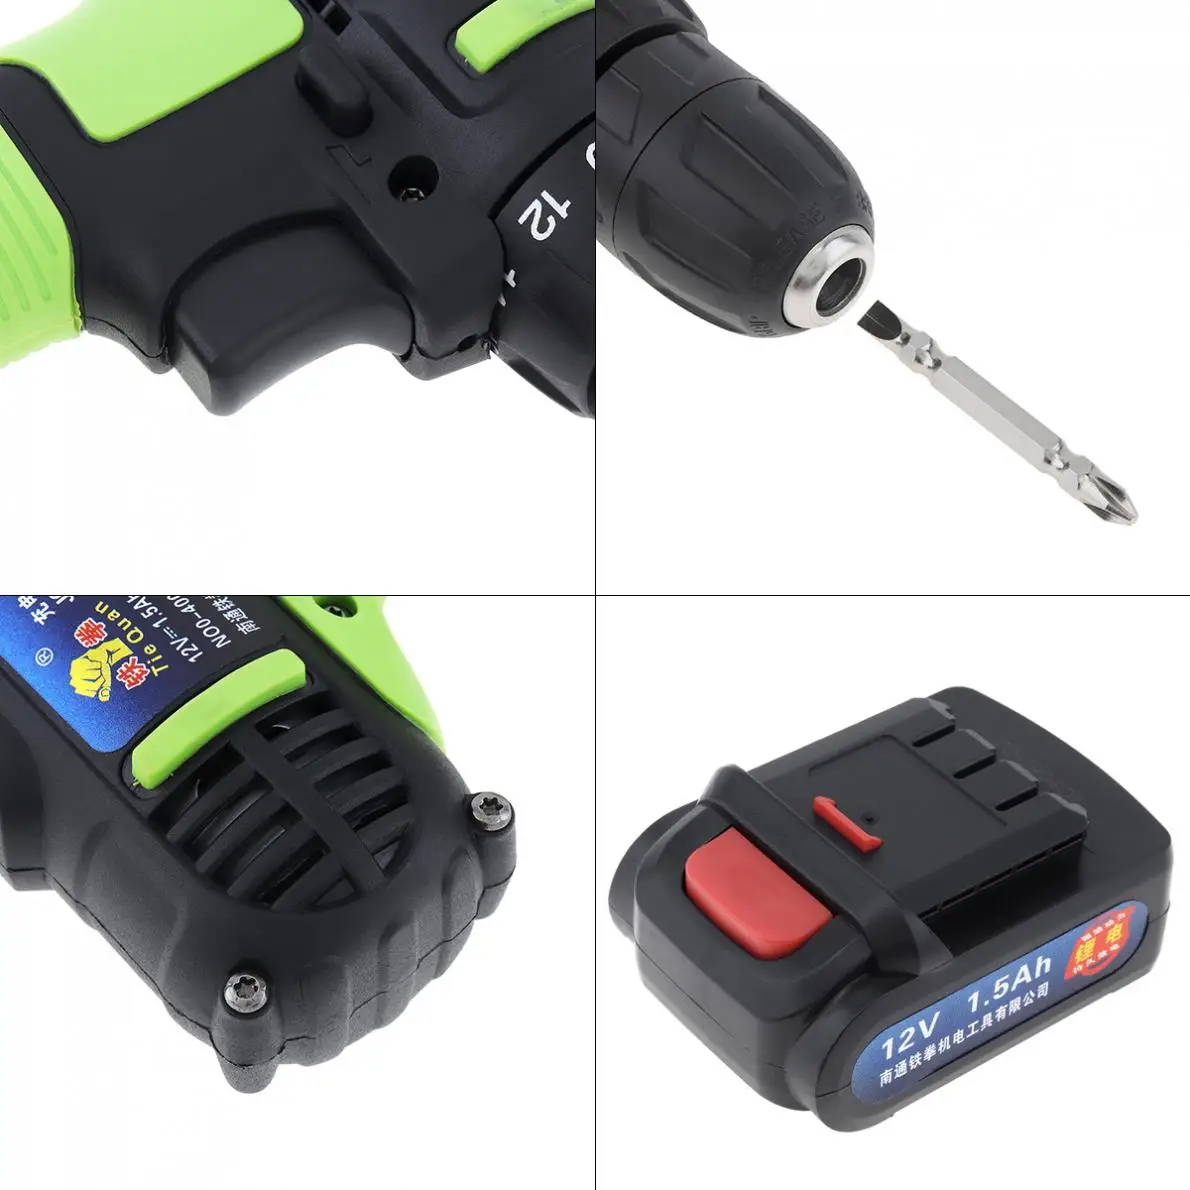 

AC 100 - 240V Cordless 12V Electric Drill / Screwdriver with 18 Gear Torque and Two-speed Adjustment Button for Handling Screws